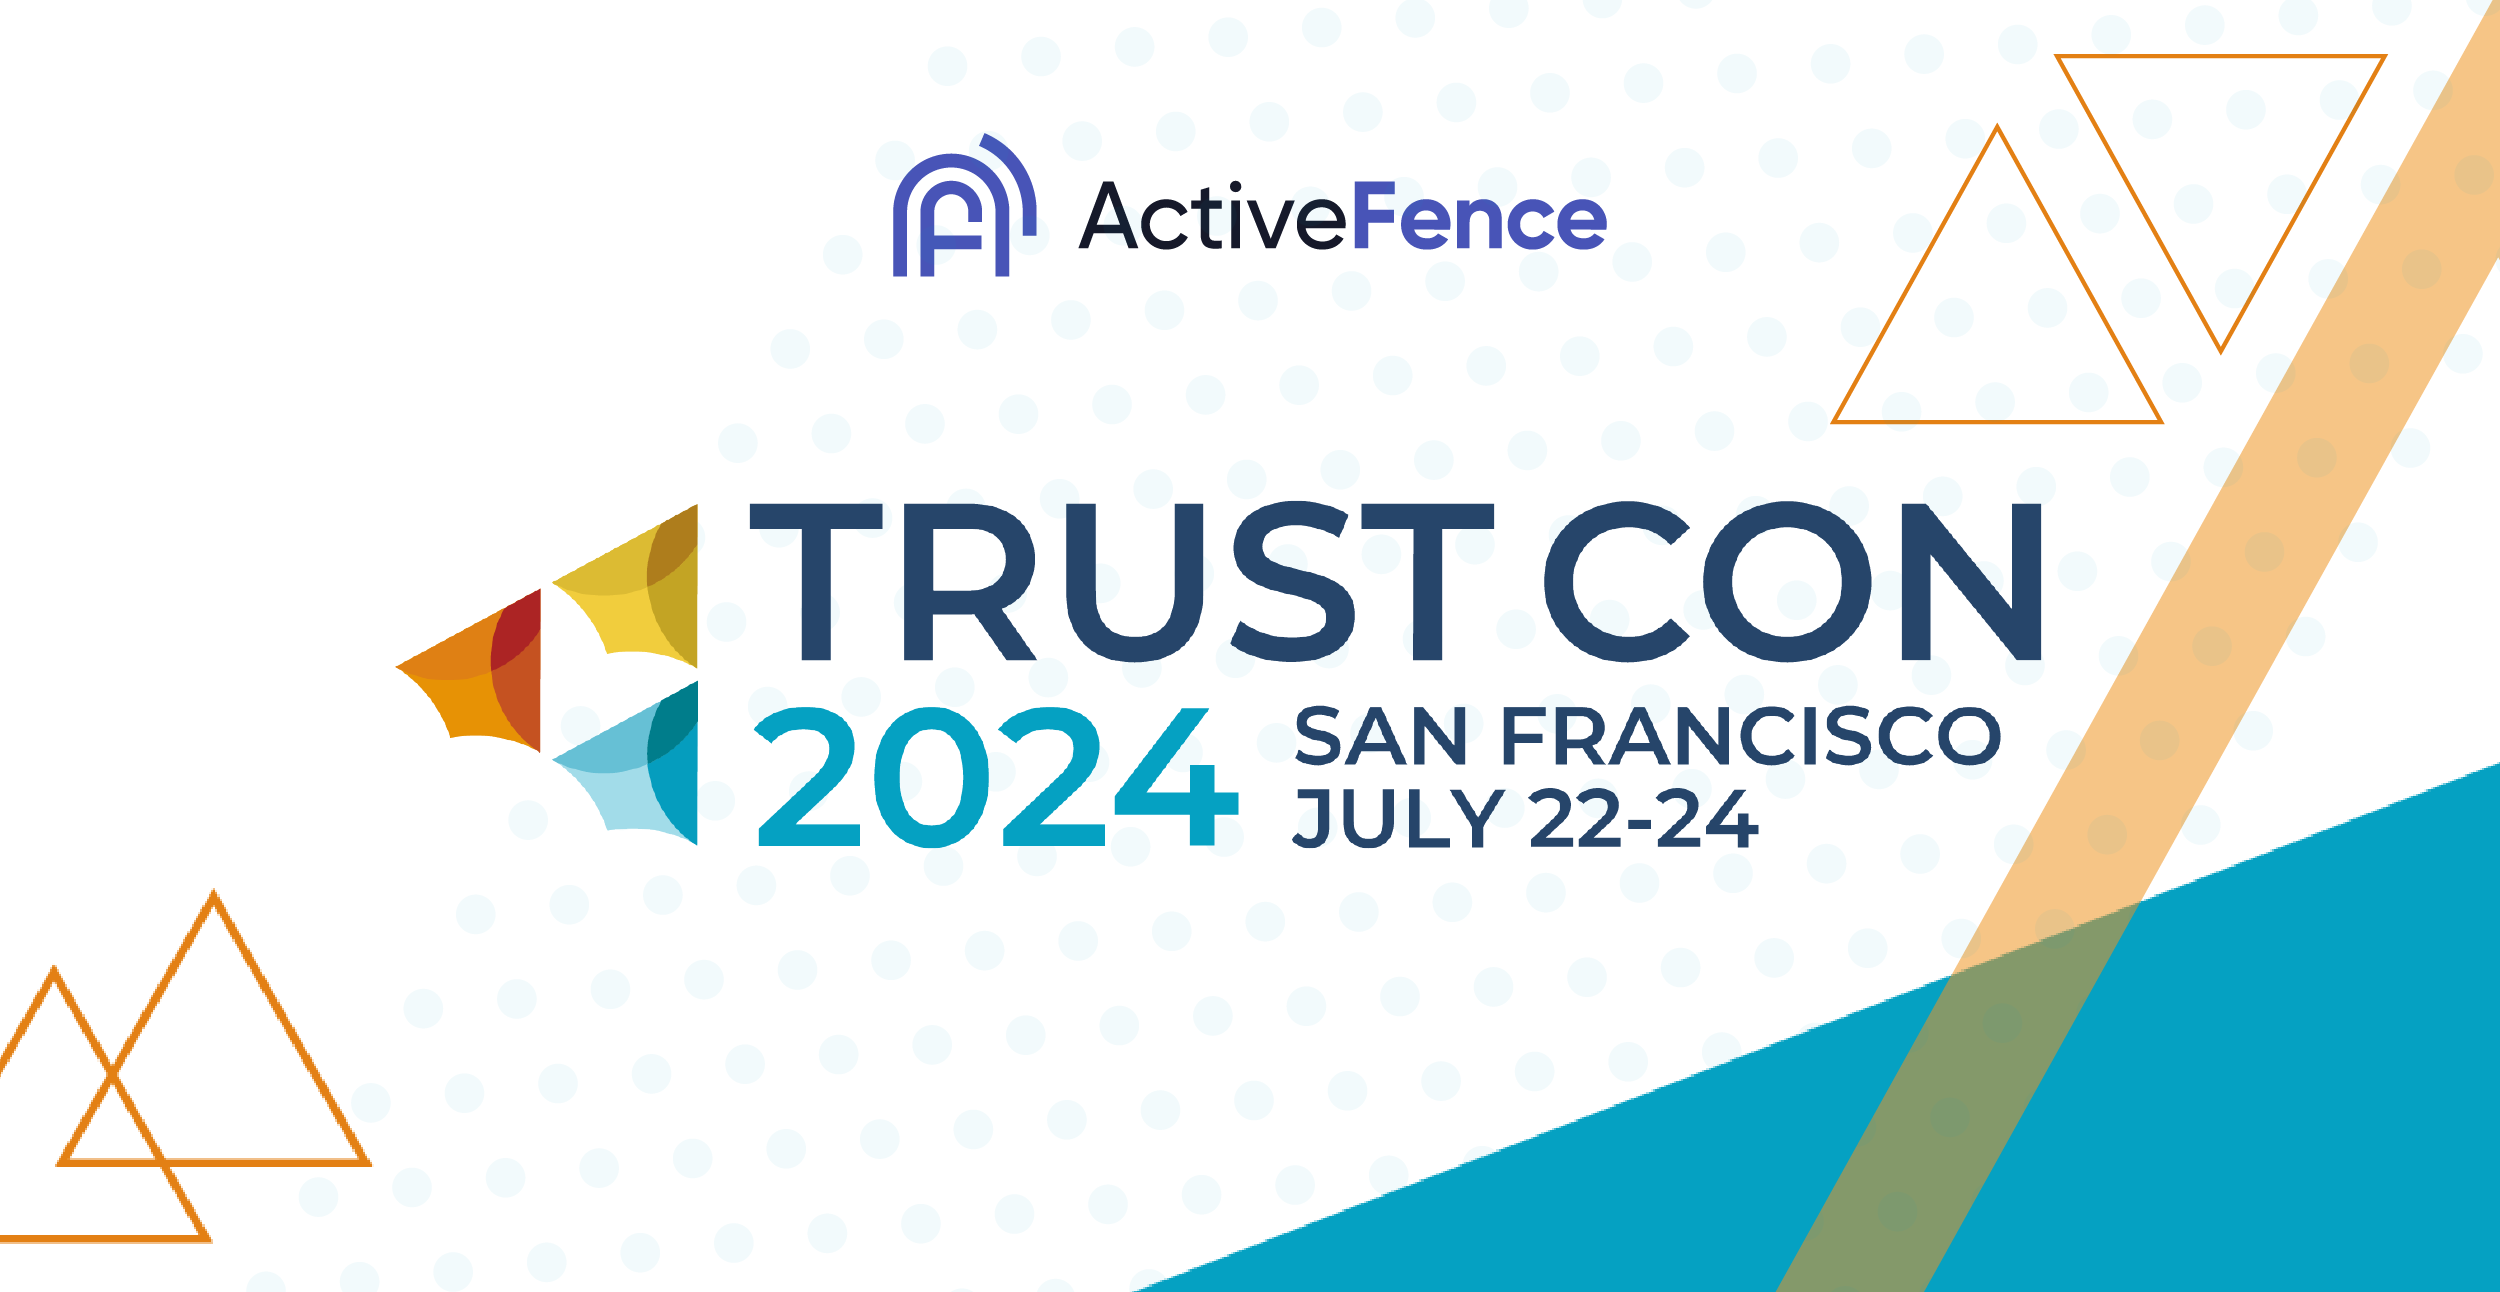 Banner for TrustCon 2024, hosted by ActiveFence in San Francisco from July 22-24, featuring geometric designs and a modern, colorful layout.